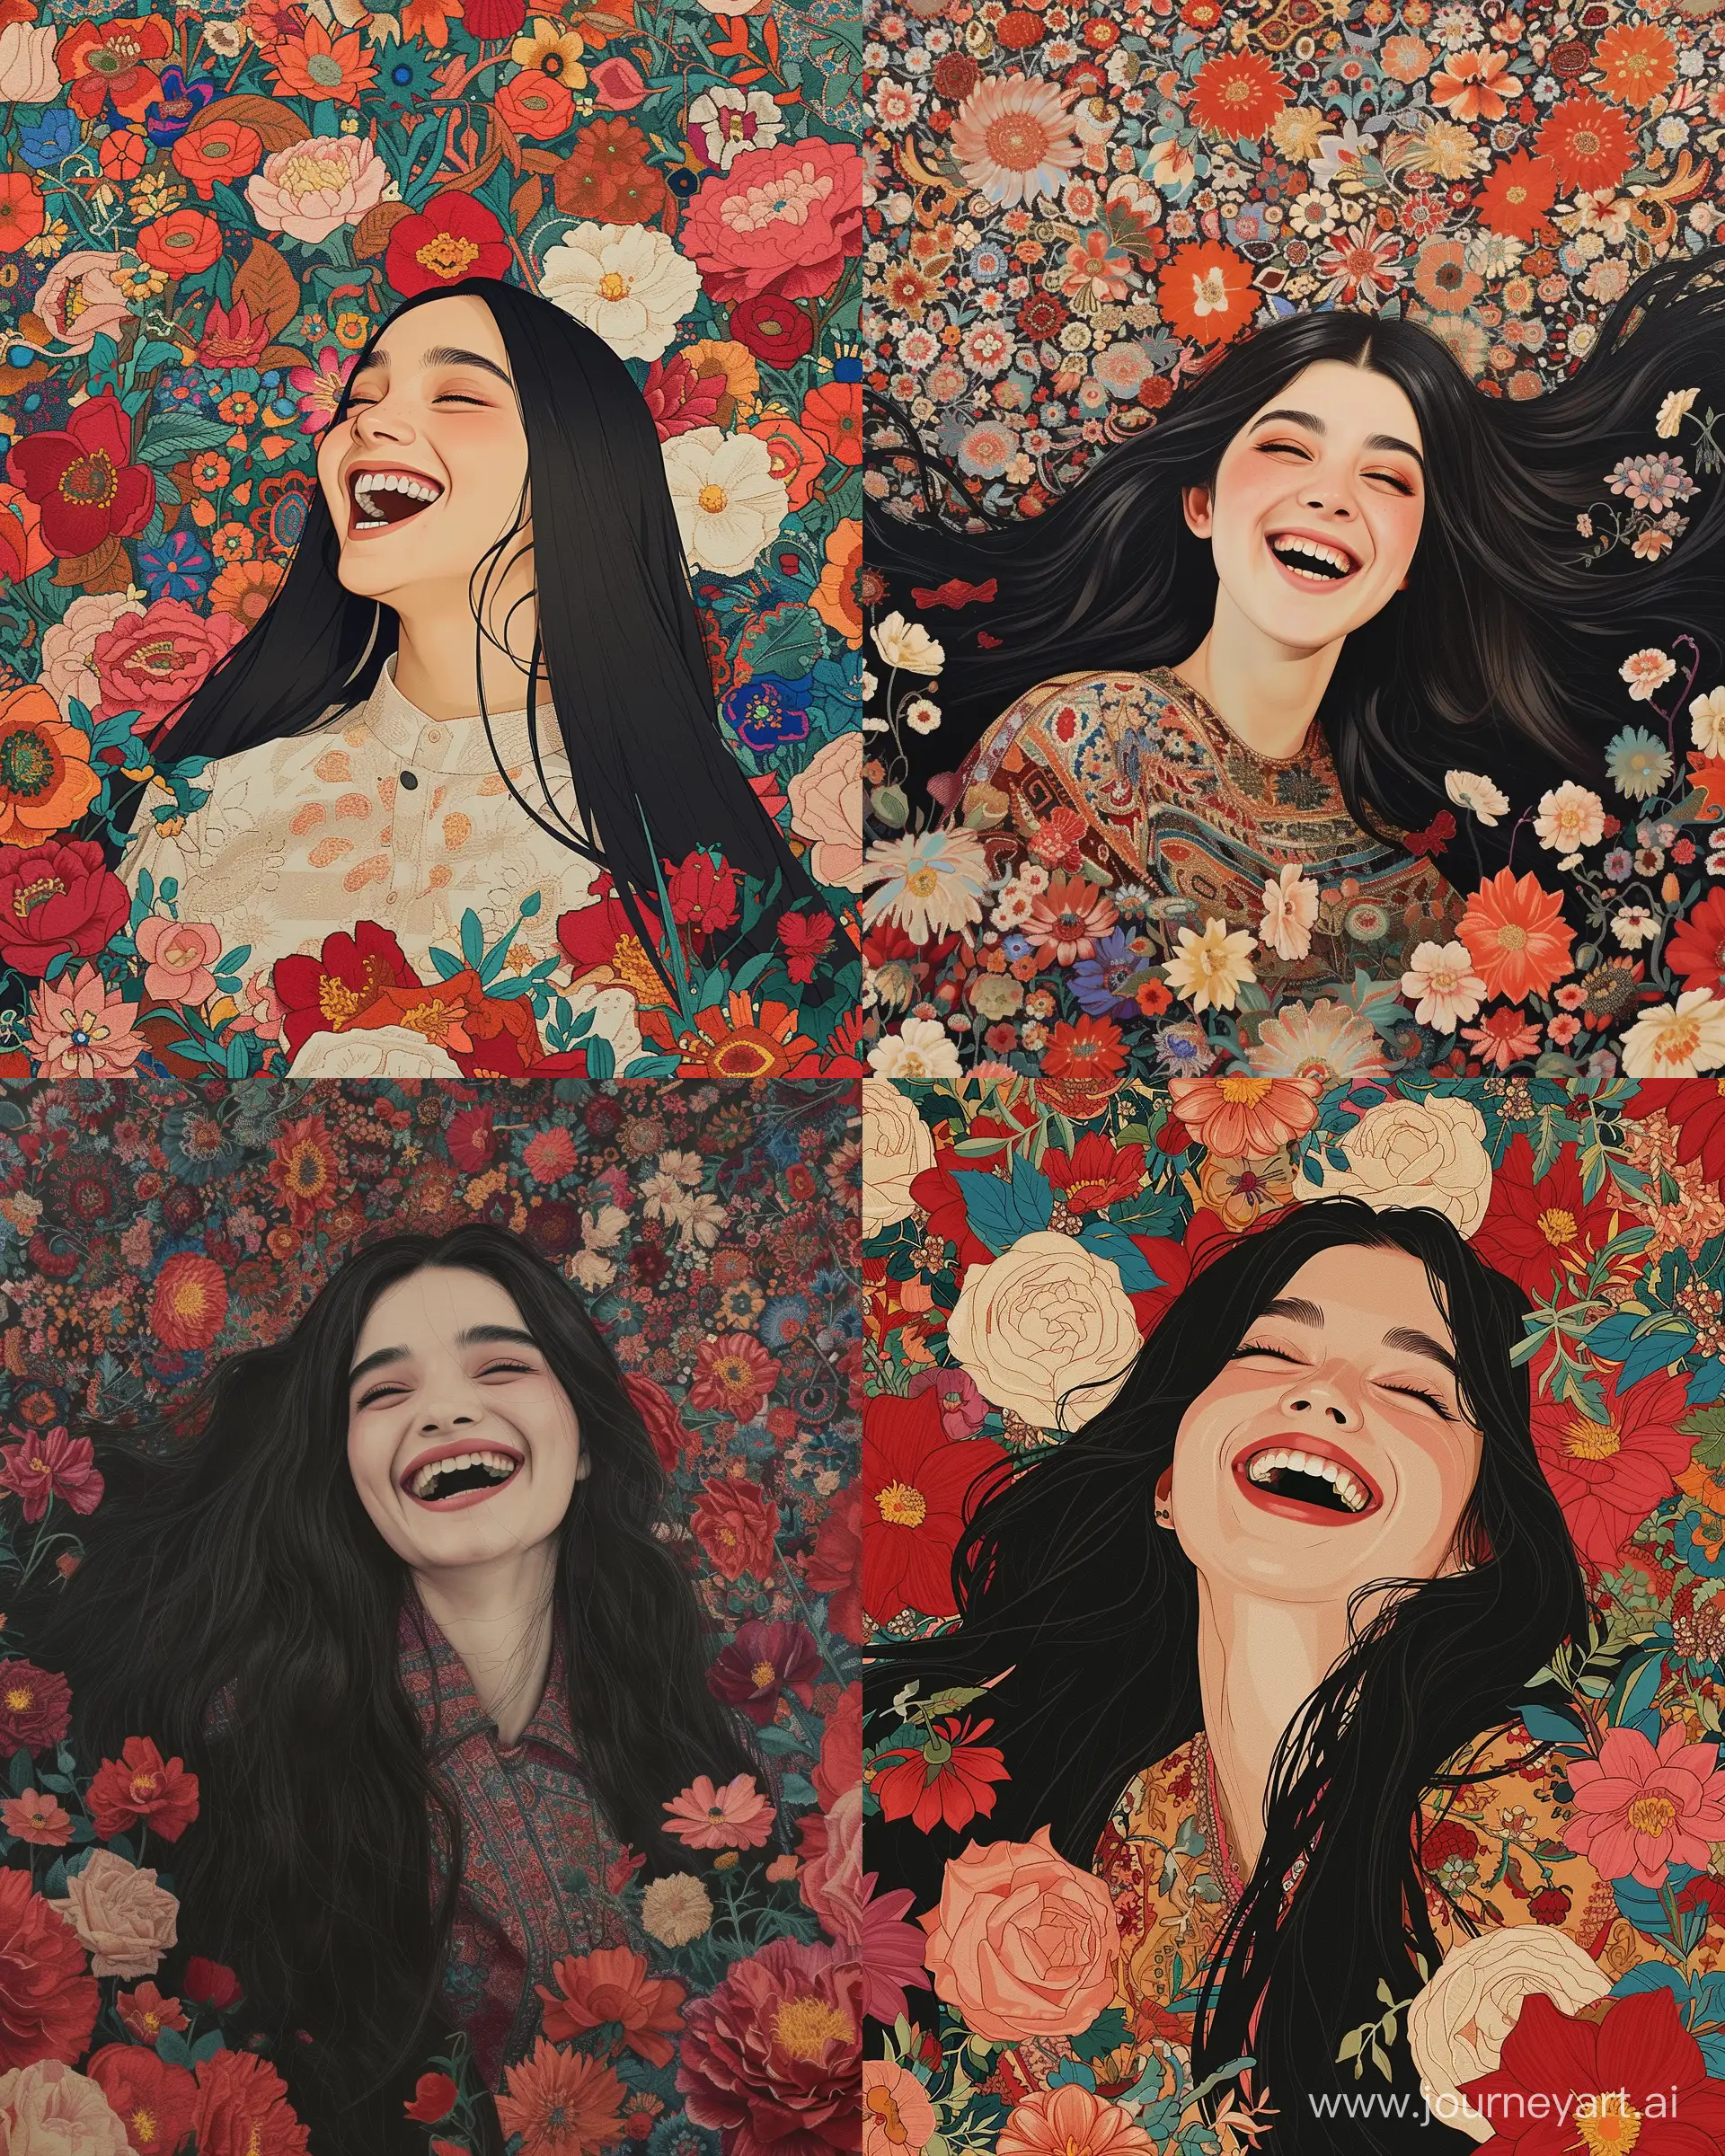 Persian carpet, beatuful 30-year persian girl laughing and happy and long black hairs, looking at the viewer, full of flowers around, colorful and red colors, carpet texture, with the luxurious texture of a Persian carpet, emphasizing high-quality wool and intricate silk details. Simulate the varying pile heights, traditional Persian knots, and rich color palette achieved through natural and vegetable dyes. Capture the essence of Persian craftsmanship, featuring geometric and floral motifs with a focus on hand-knotted precision. Aim for a visually stunning piece that encapsulates the tactile richness and cultural symbolism of traditional Persian carpets,intricate high details --ar 4:5 --style raw 